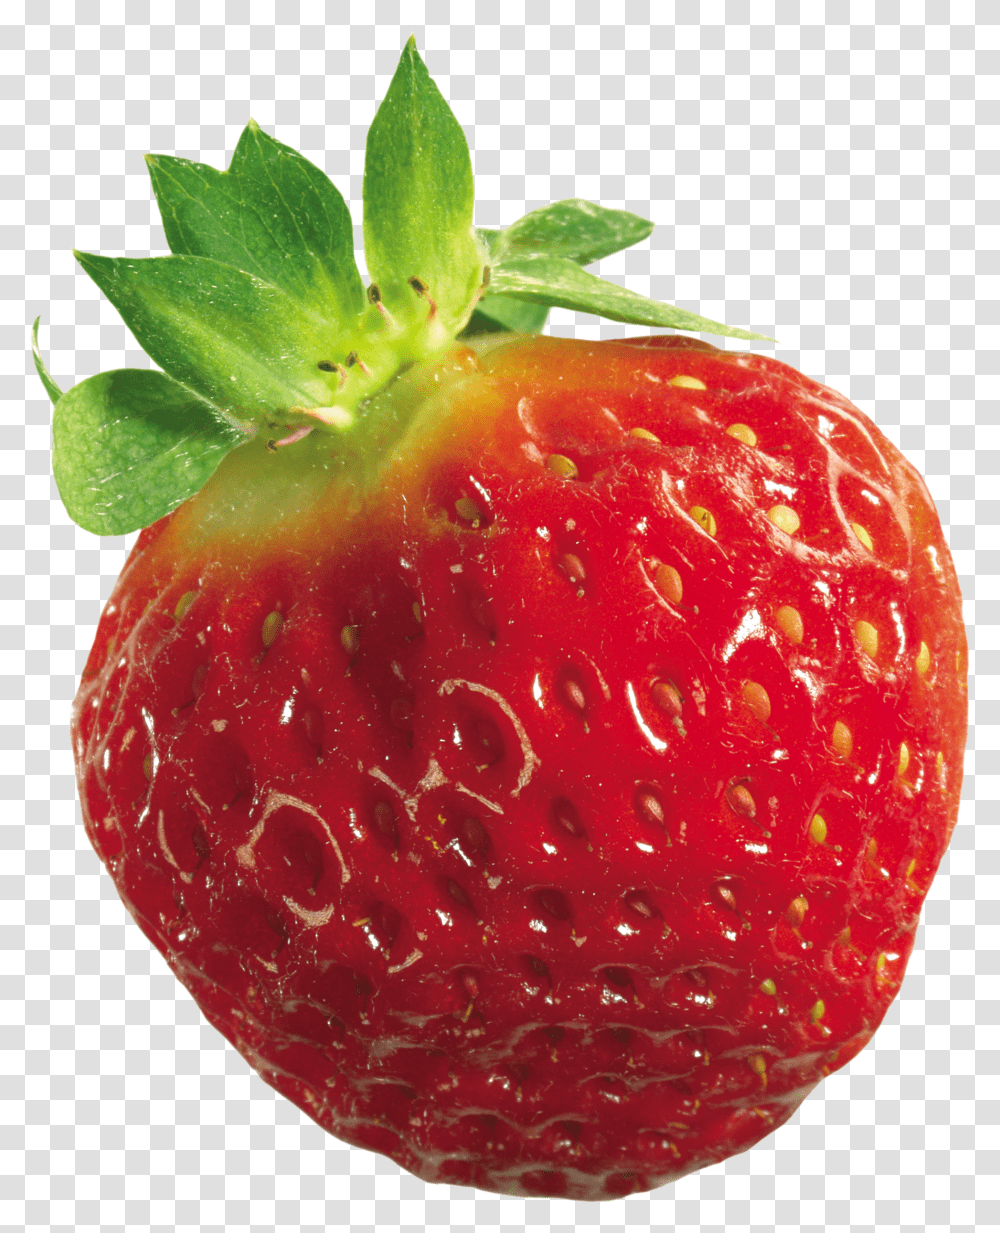 Strawberry Images Strawberry Transparent Png